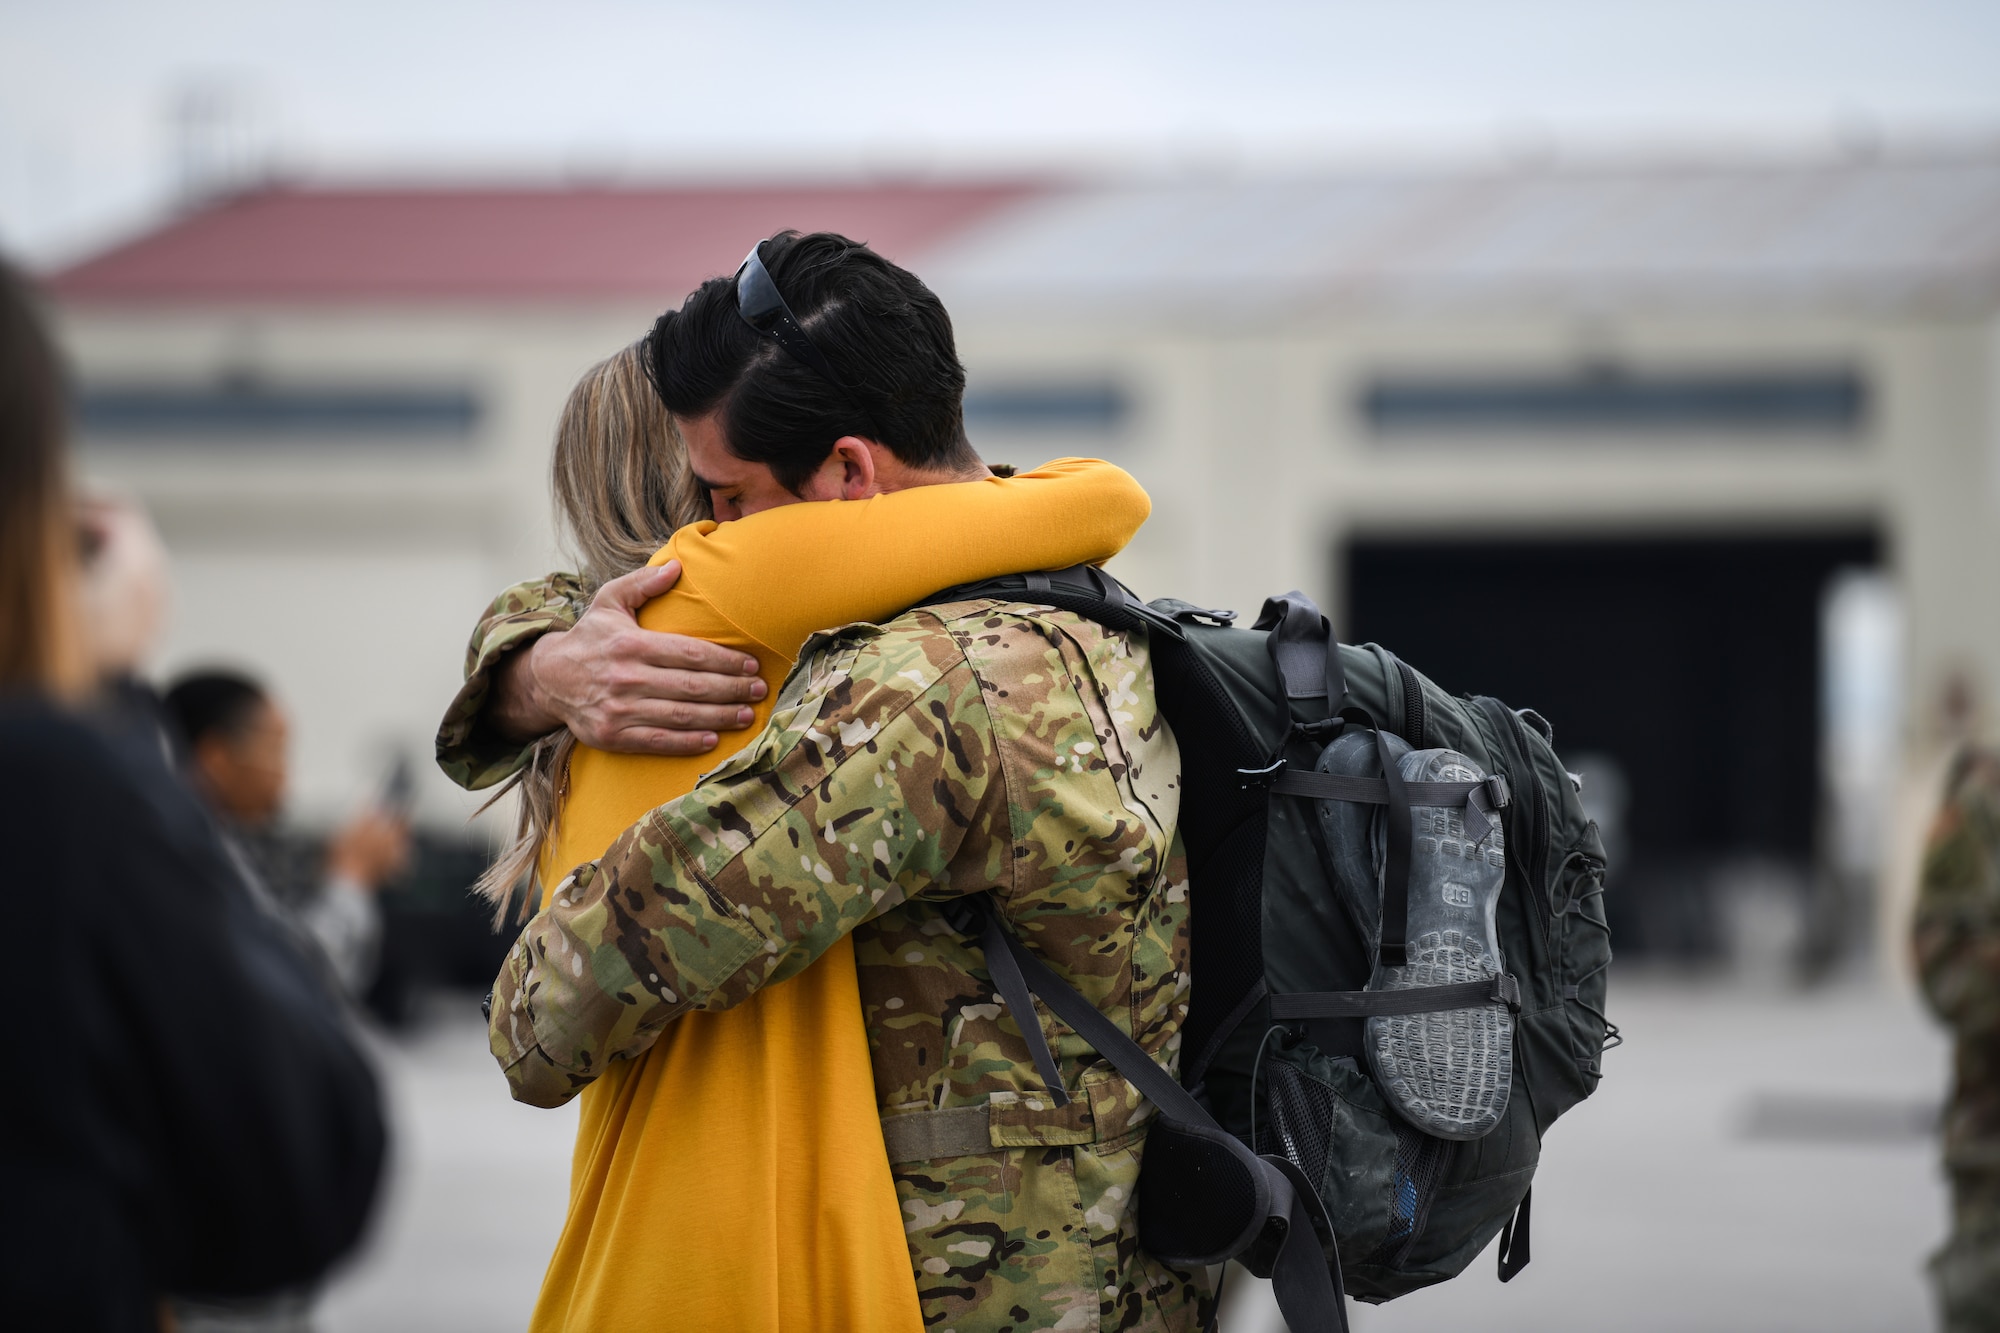 A U.S. Airman reunites with his family at Aviano Air Base, Italy, Oct. 8, 2019.The HH-60G is also tasked to perform military operations other than war, including civil search and rescue, medical evacuation, disaster response, humanitarian assistance, security cooperation/aviation advisory, NASA space flight support, and rescue command and control. (U.S. Air Force photo by Airman 1st Class Ericka A. Woolever